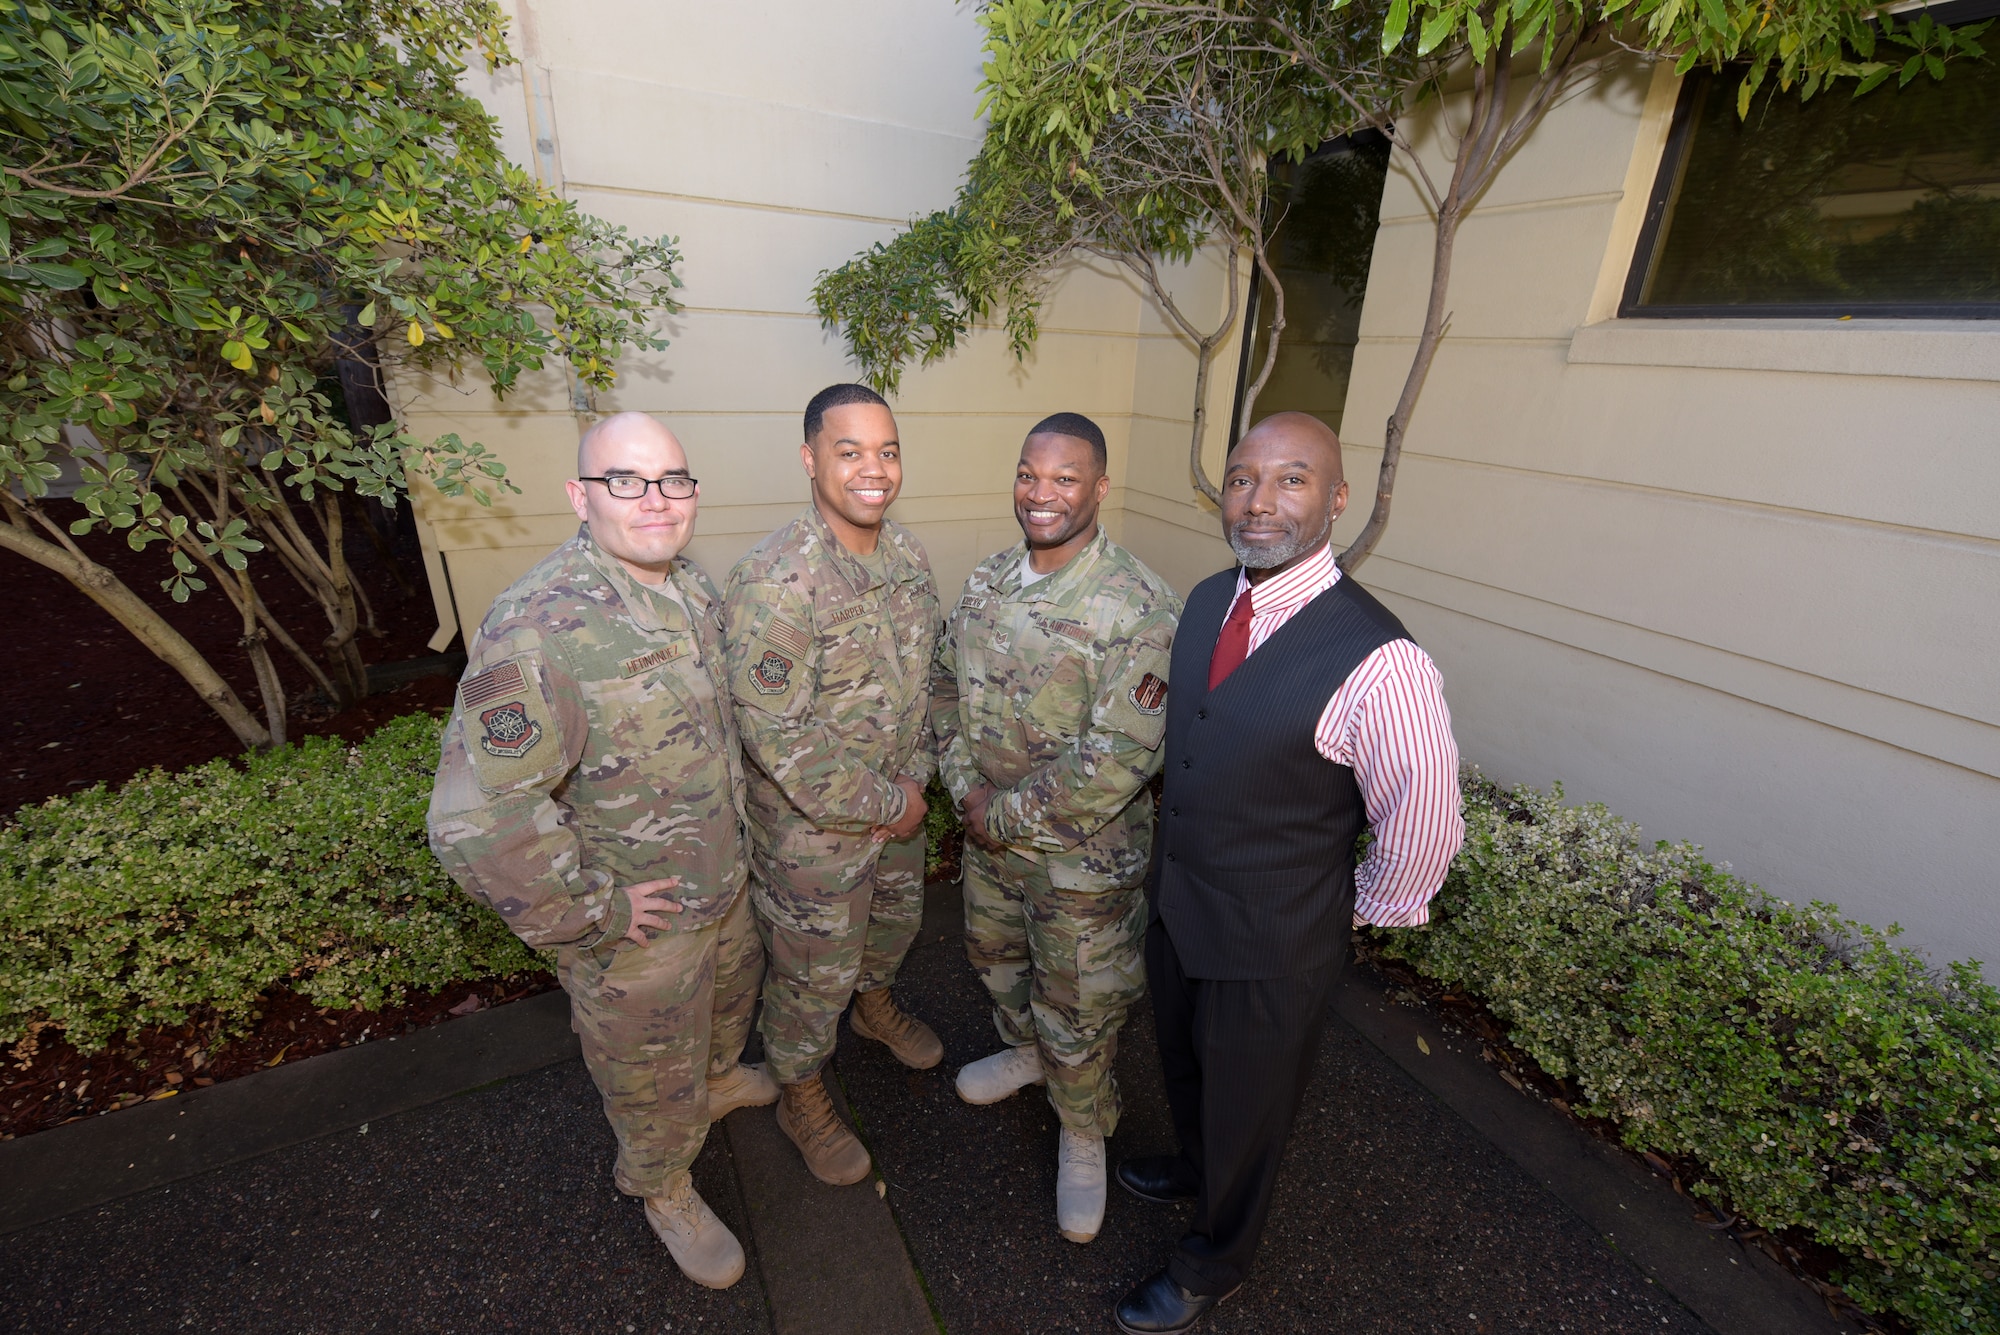 From left to right, U.S. Air Force Staff Sgt. Erick Hernandez, 60th Air Mobility Wing Equal Opportunity counselor, Air Force Staff Sgt. Baso Harper III, 60th AMW EO counselor, Air Force Tech. Sgt. Piankhy Richberg, 60th AMW EO NCO in charge and Grayland Hilt, 60th AMW EO director, pose for a photo Dec. 17, 2018, at Travis Air Force Base, California.. The EO office implemented a new conflict management program in June 2018 to help Airmen resolve conflict. (U.S. Air Force photo by Tech. Sgt. James Hodgman)